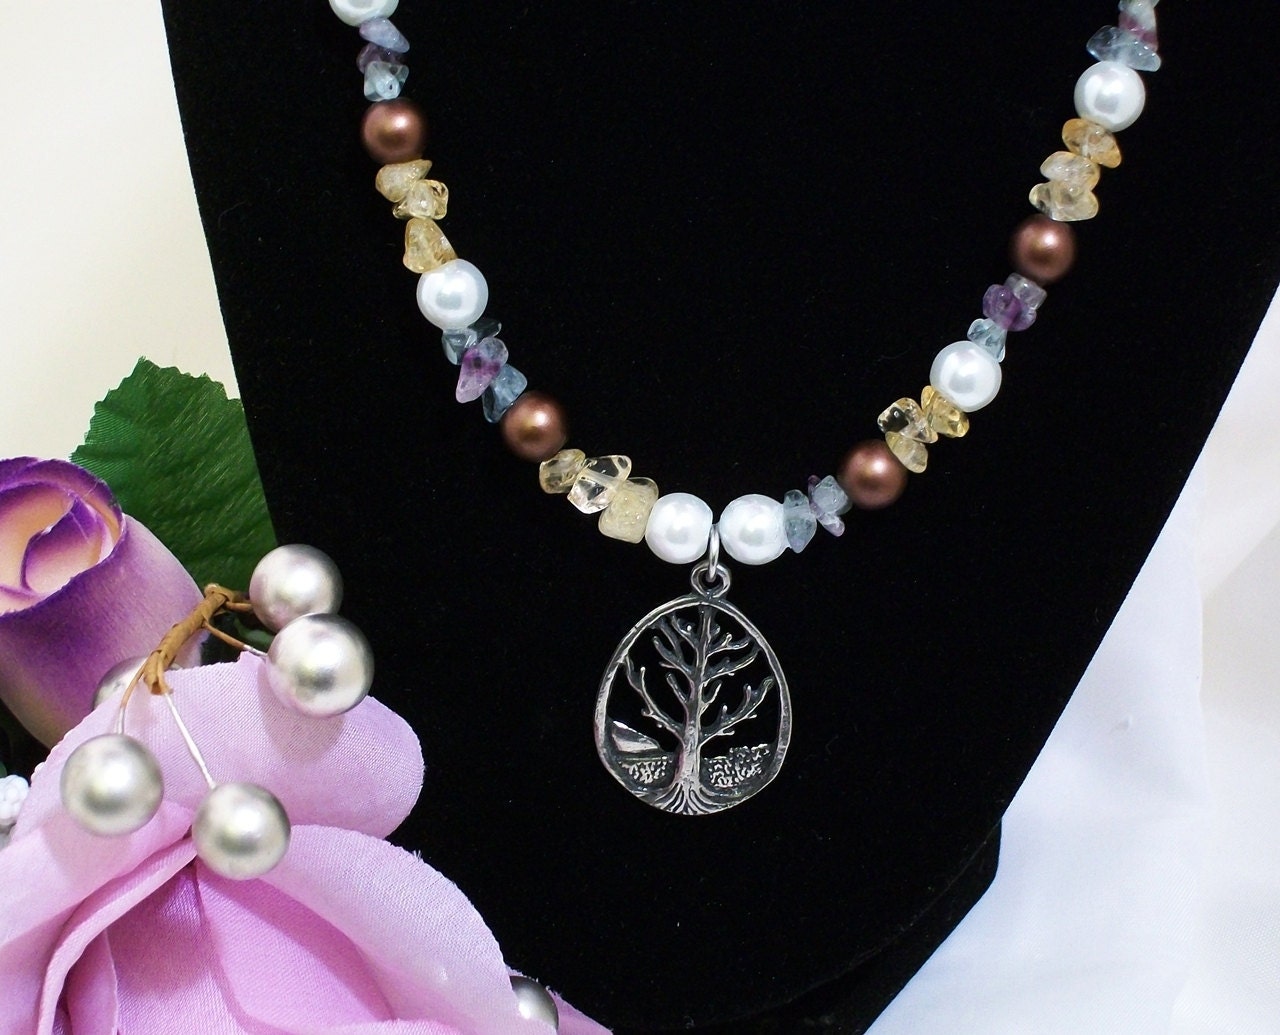 The World Tree Necklace